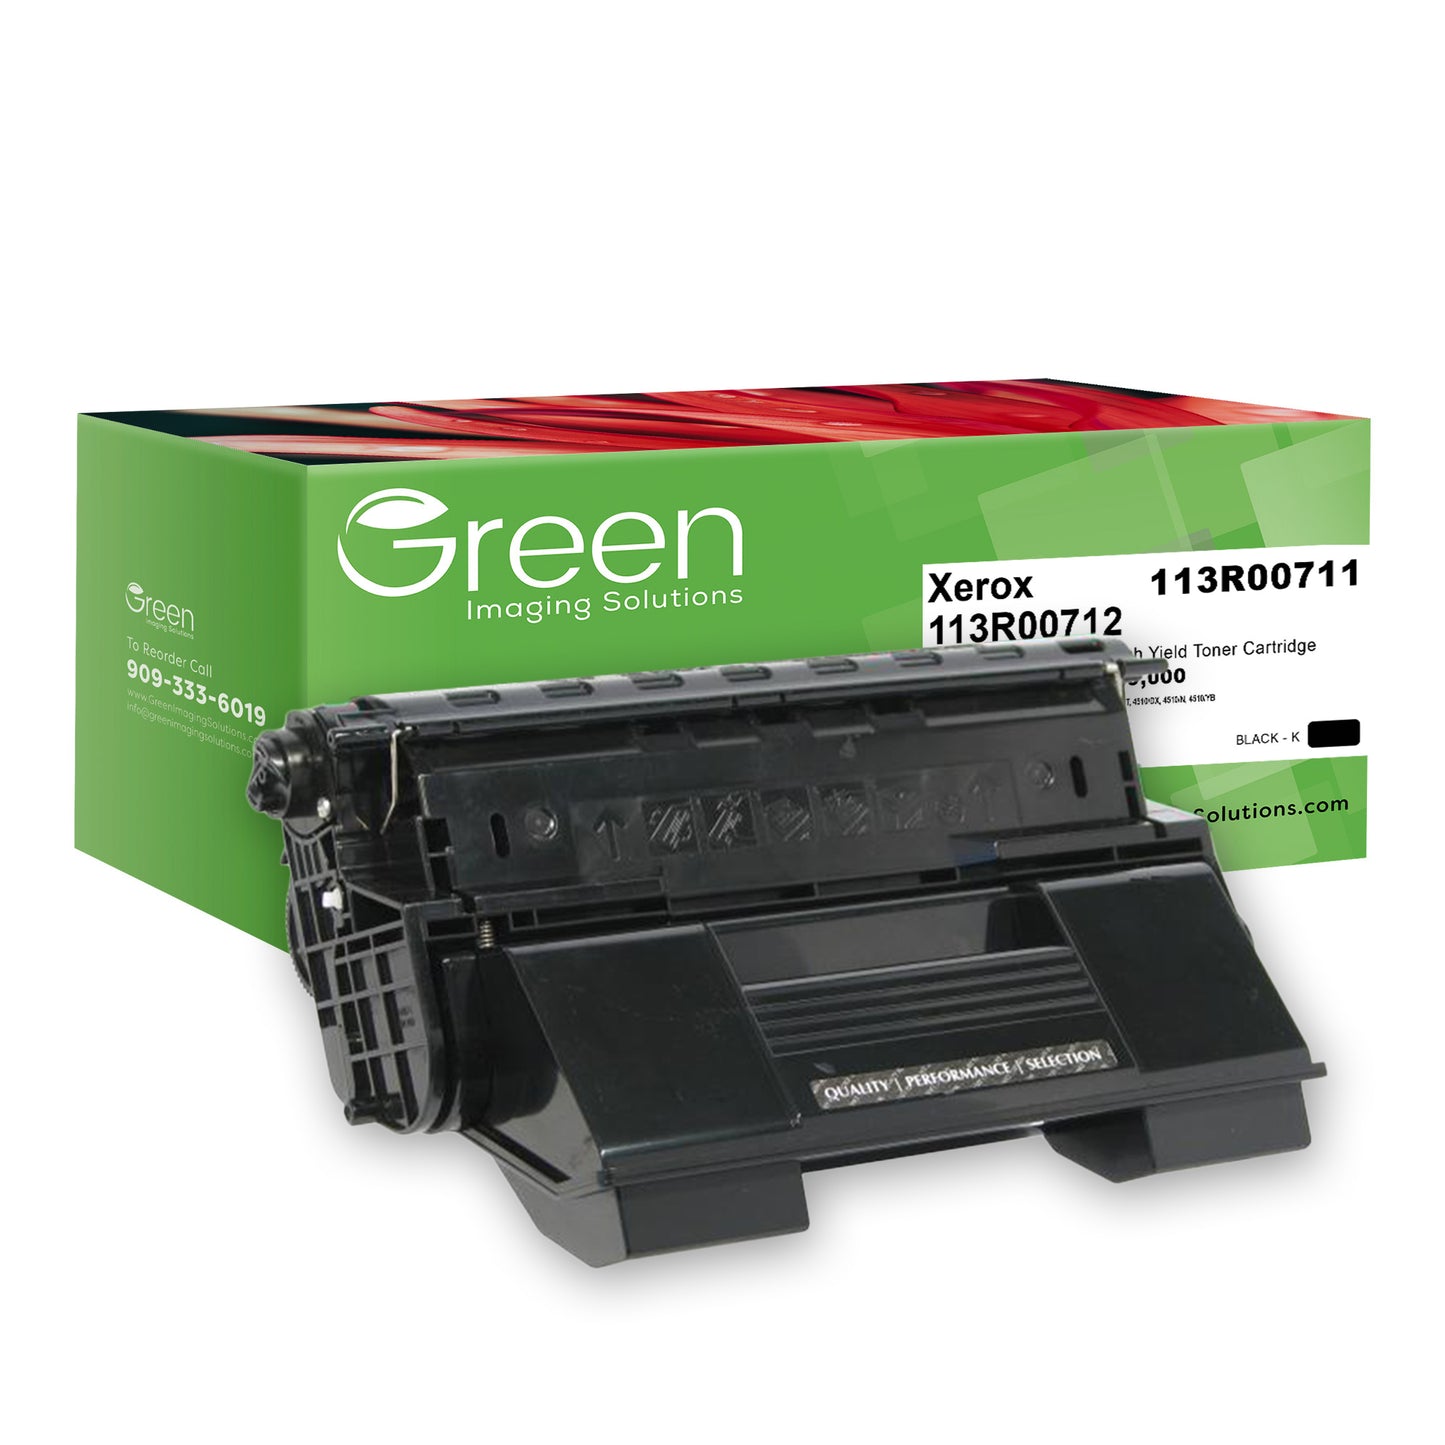 Green Imaging Solutions USA Remanufactured High Yield Toner Cartridge for Xerox 113R00712/113R00711